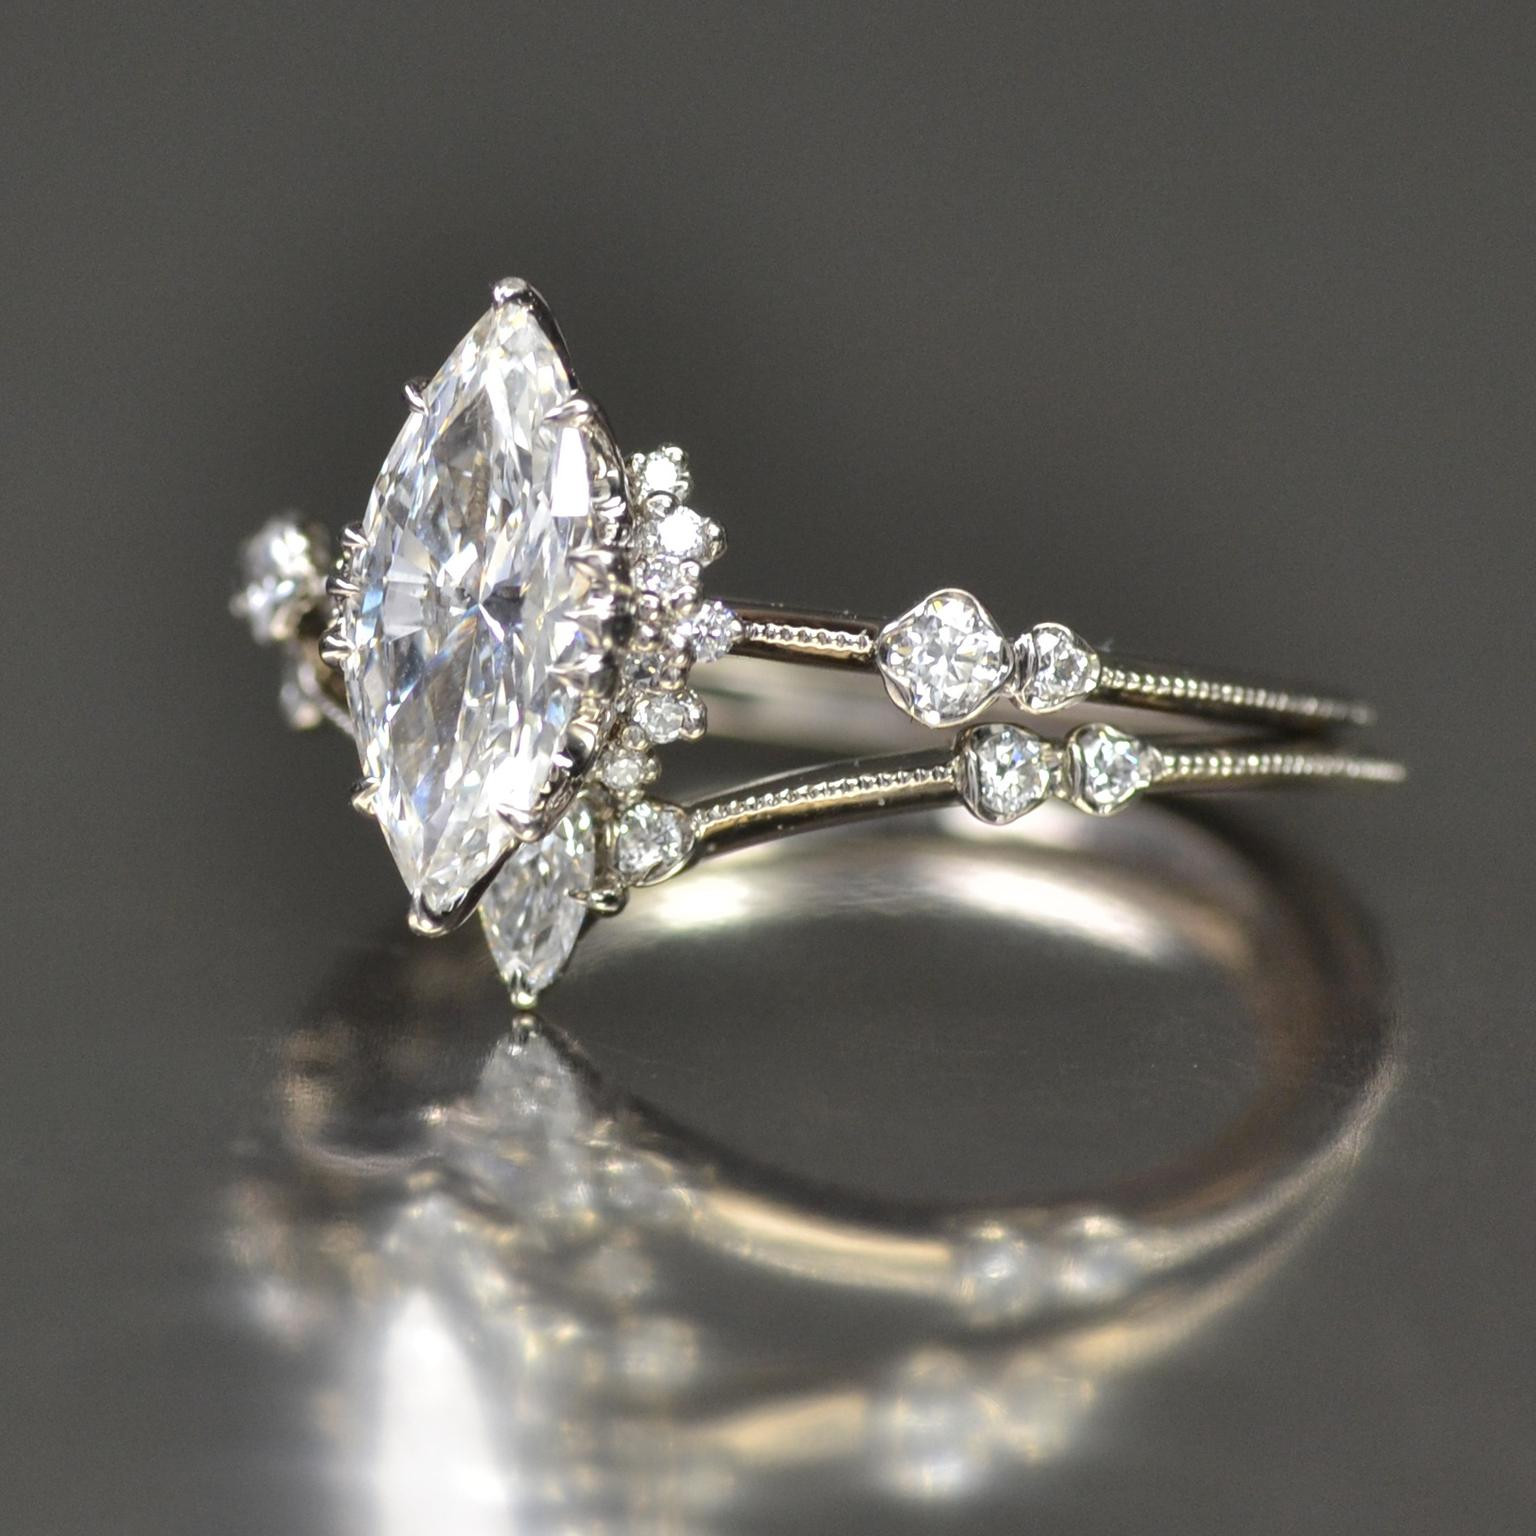 Marquise Diamond Engagement Ring
 The seven engagement ring trends that are huge in 2017